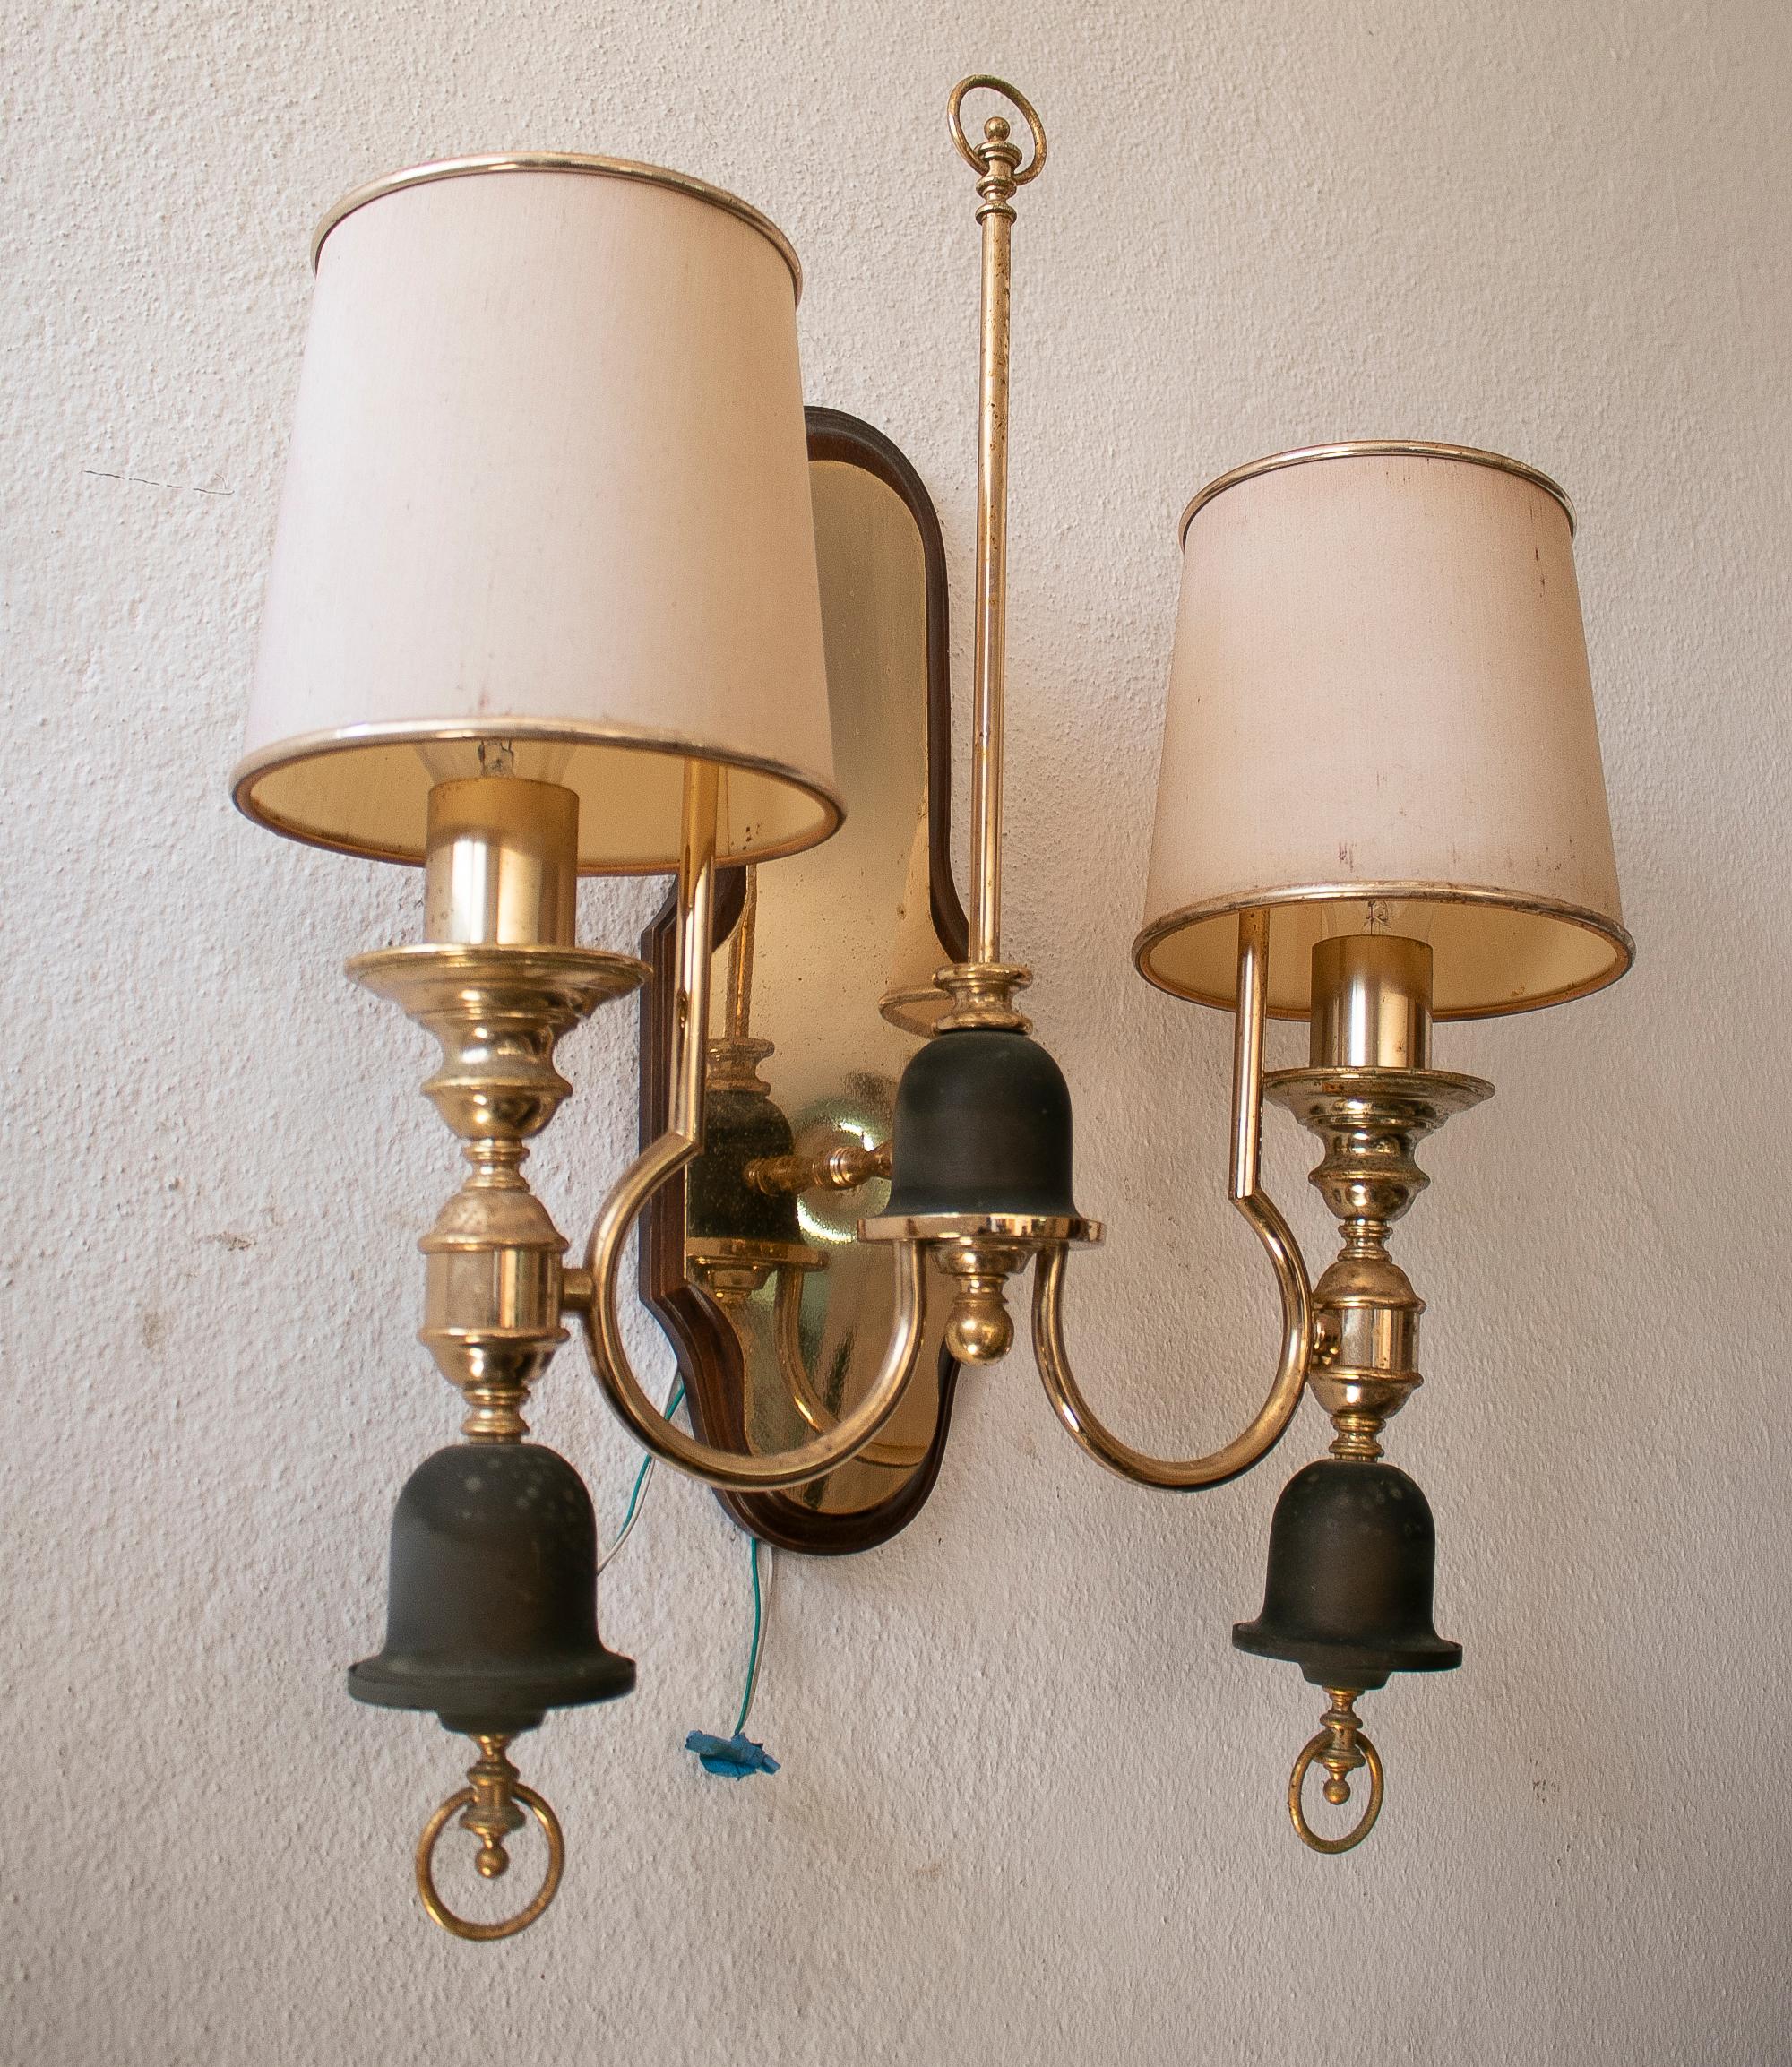 Pair of 1970s Spanish gilt bronze 2-arm wall sconces with shades.